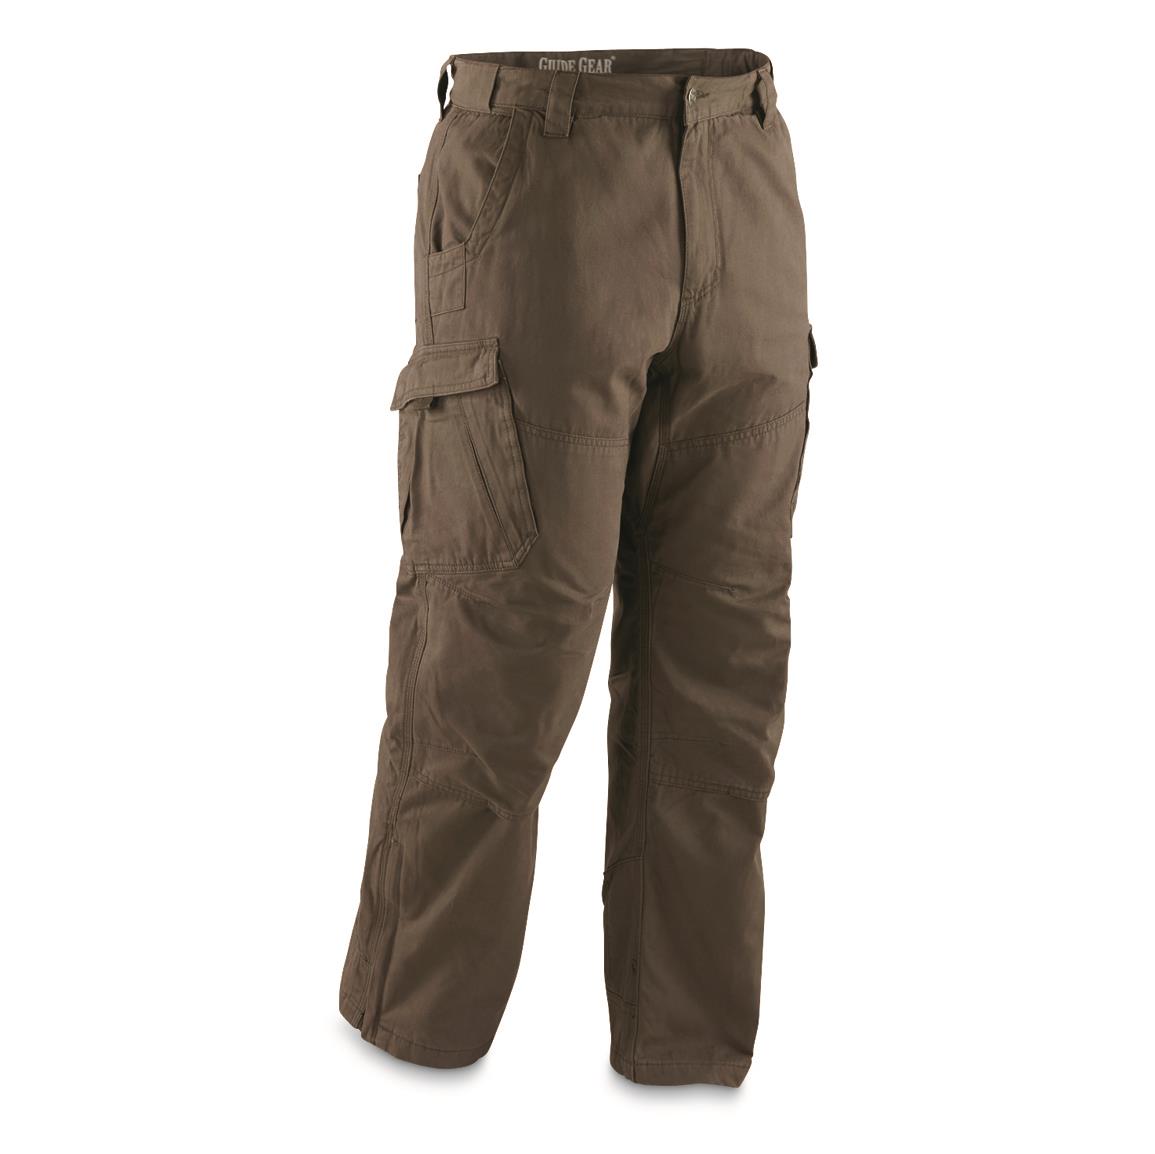 Guide Gear Men's Quilt-lined Canvas Work Pants - 640542, Insulated ...